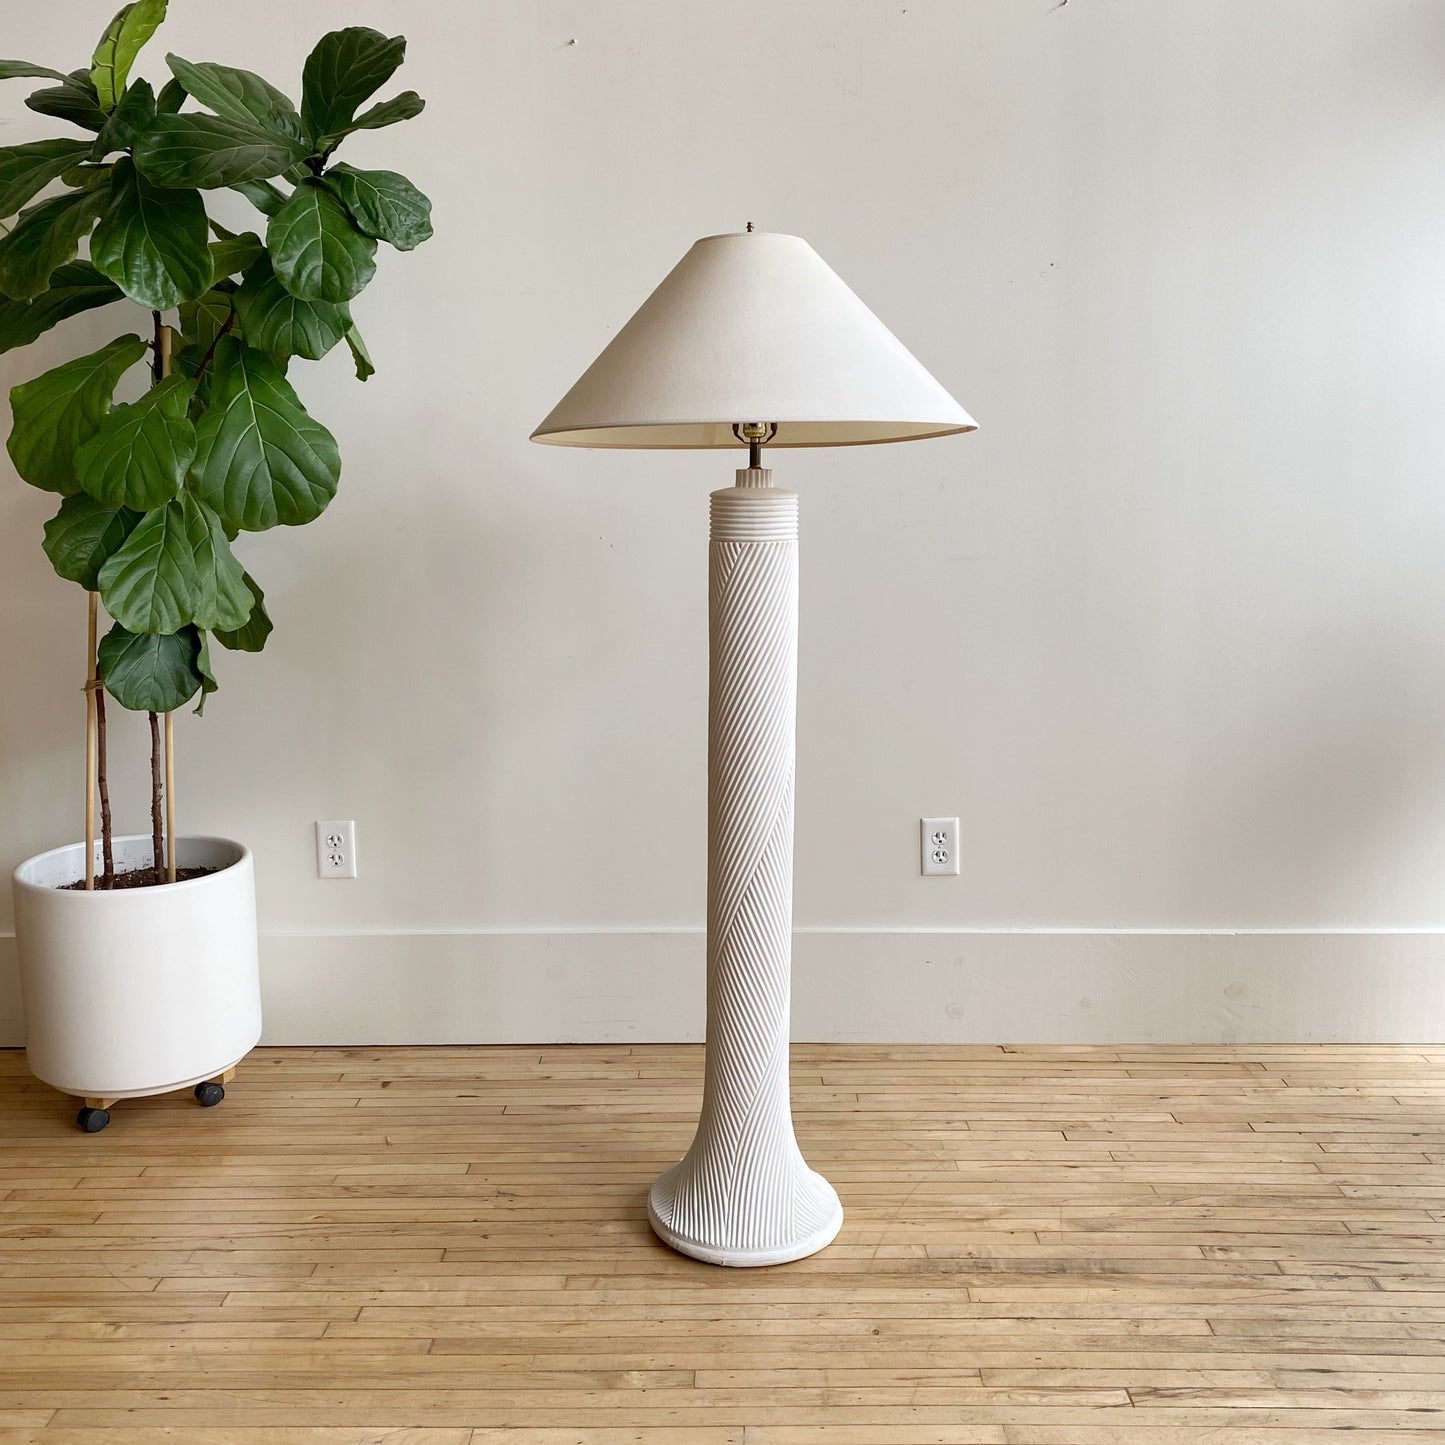 Vintage Reeded Plaster Floor Lamp with Shade